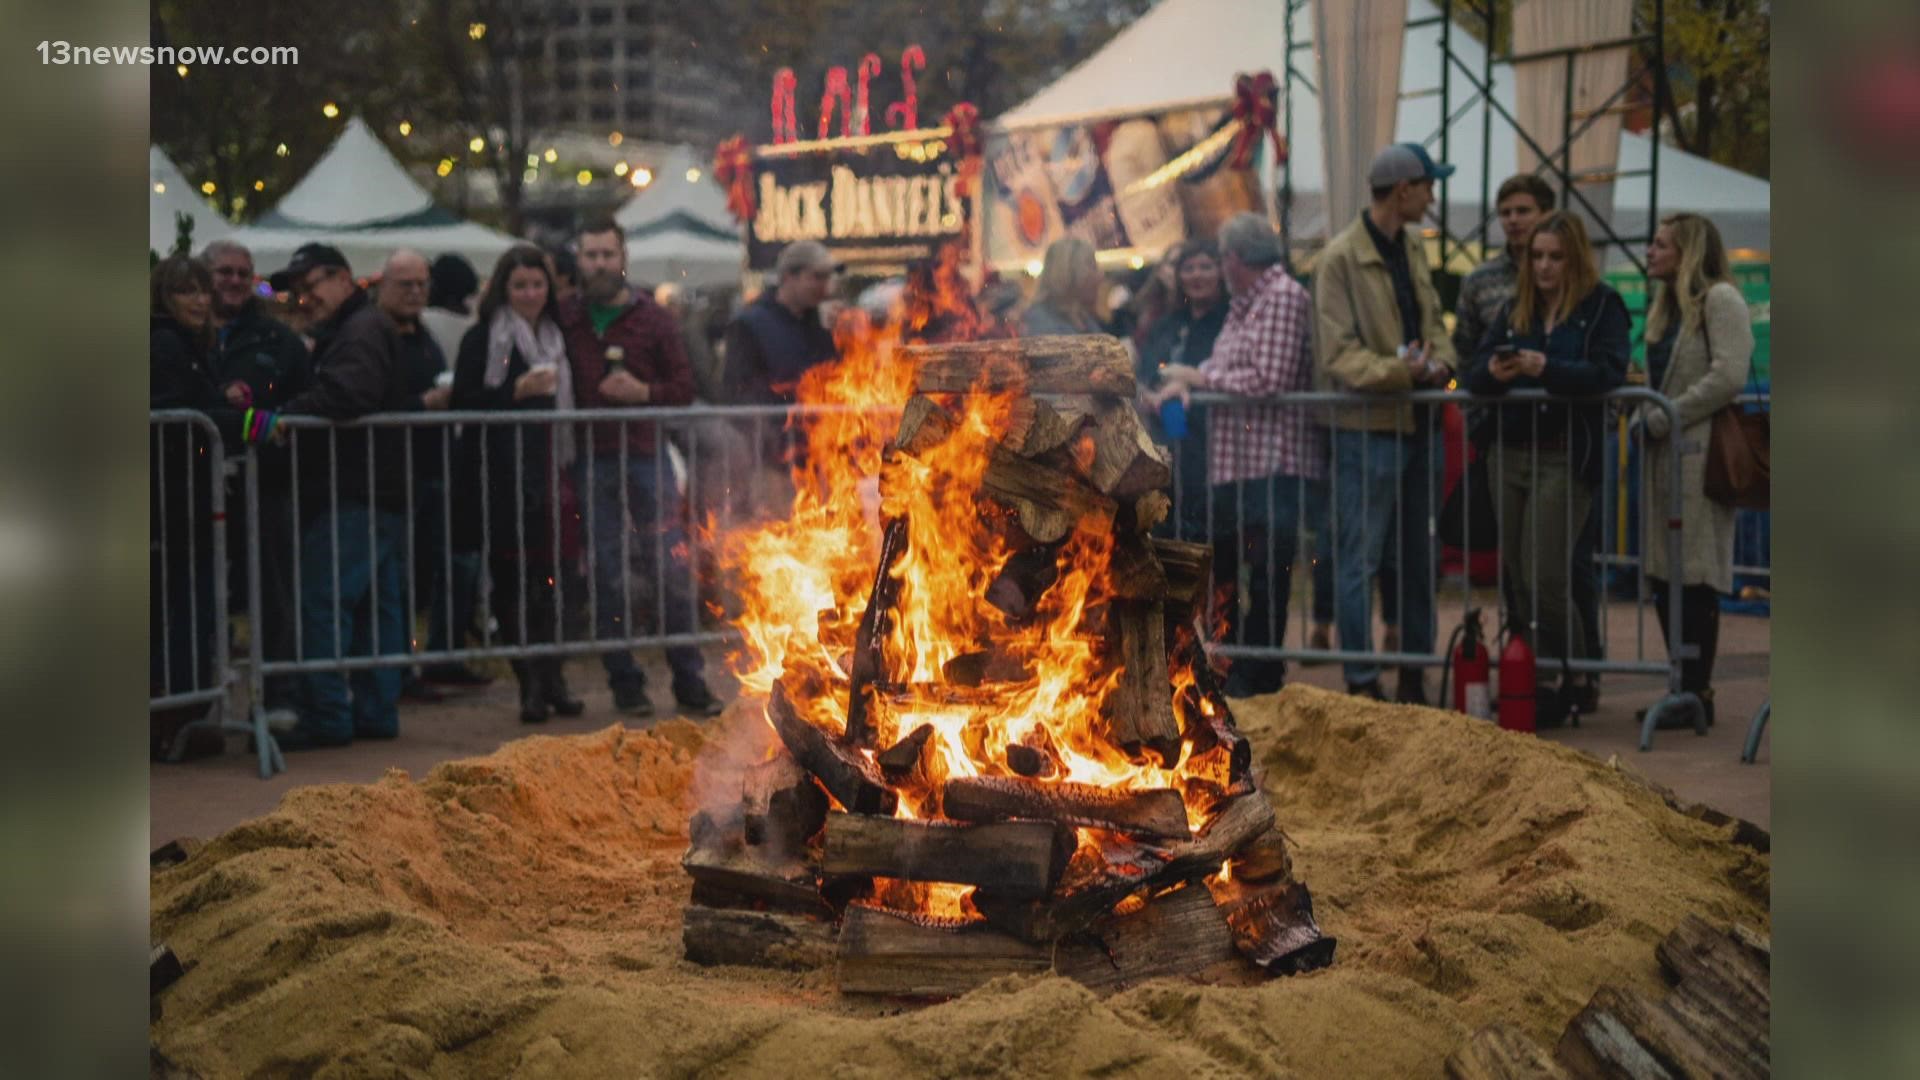 This weekend there's an event happening in Downtown Norfolk that will certainly get you in the holiday spirit: the Holiday Yule Log Bonfire and Holiday Marketplace.